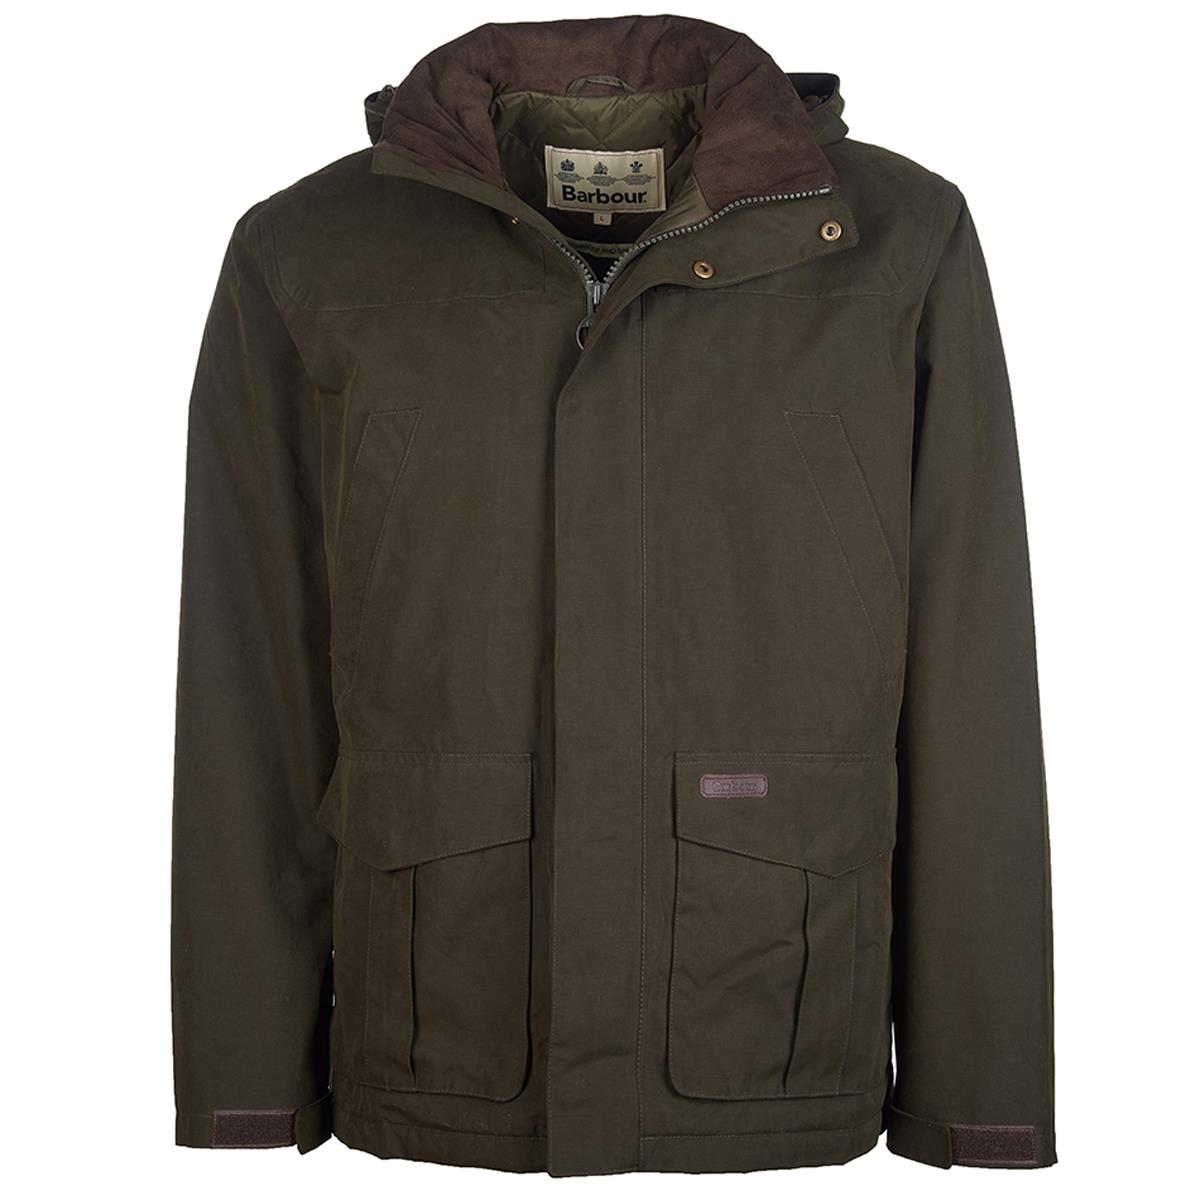 What is the material of the barbour brockstone jacket?